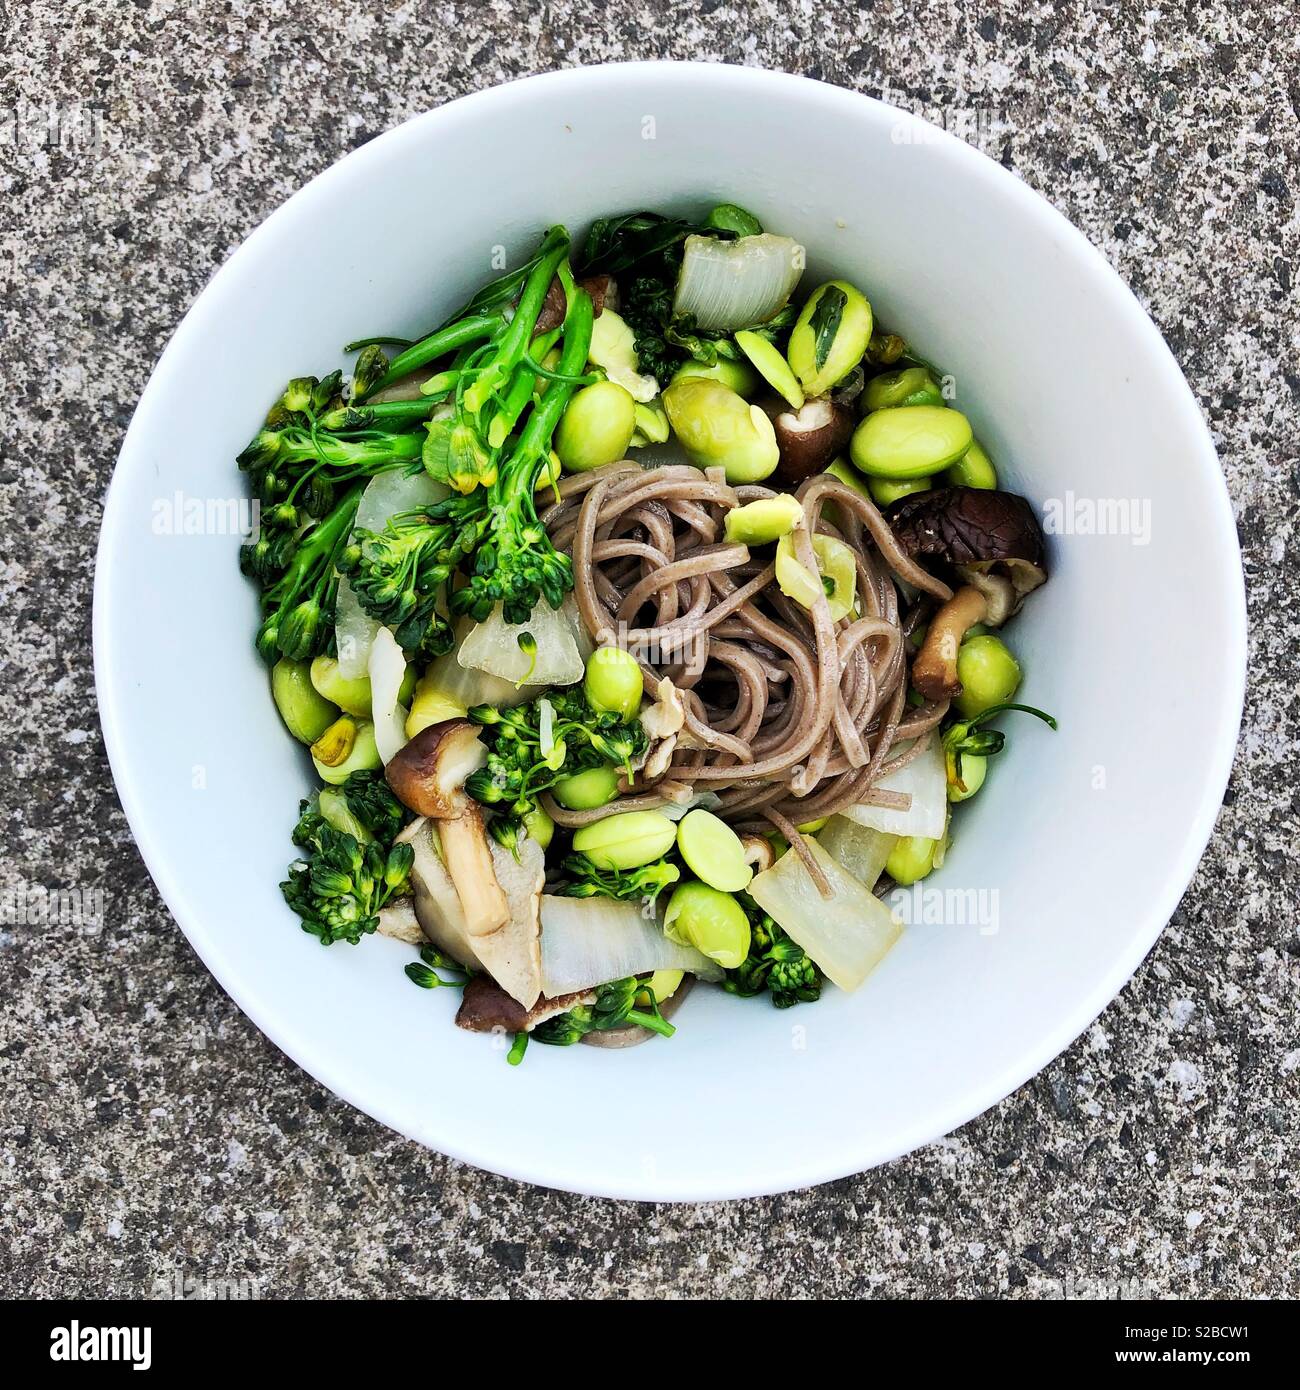 Yummy healthy vegan soba noodle bowl with greens Stock Photo